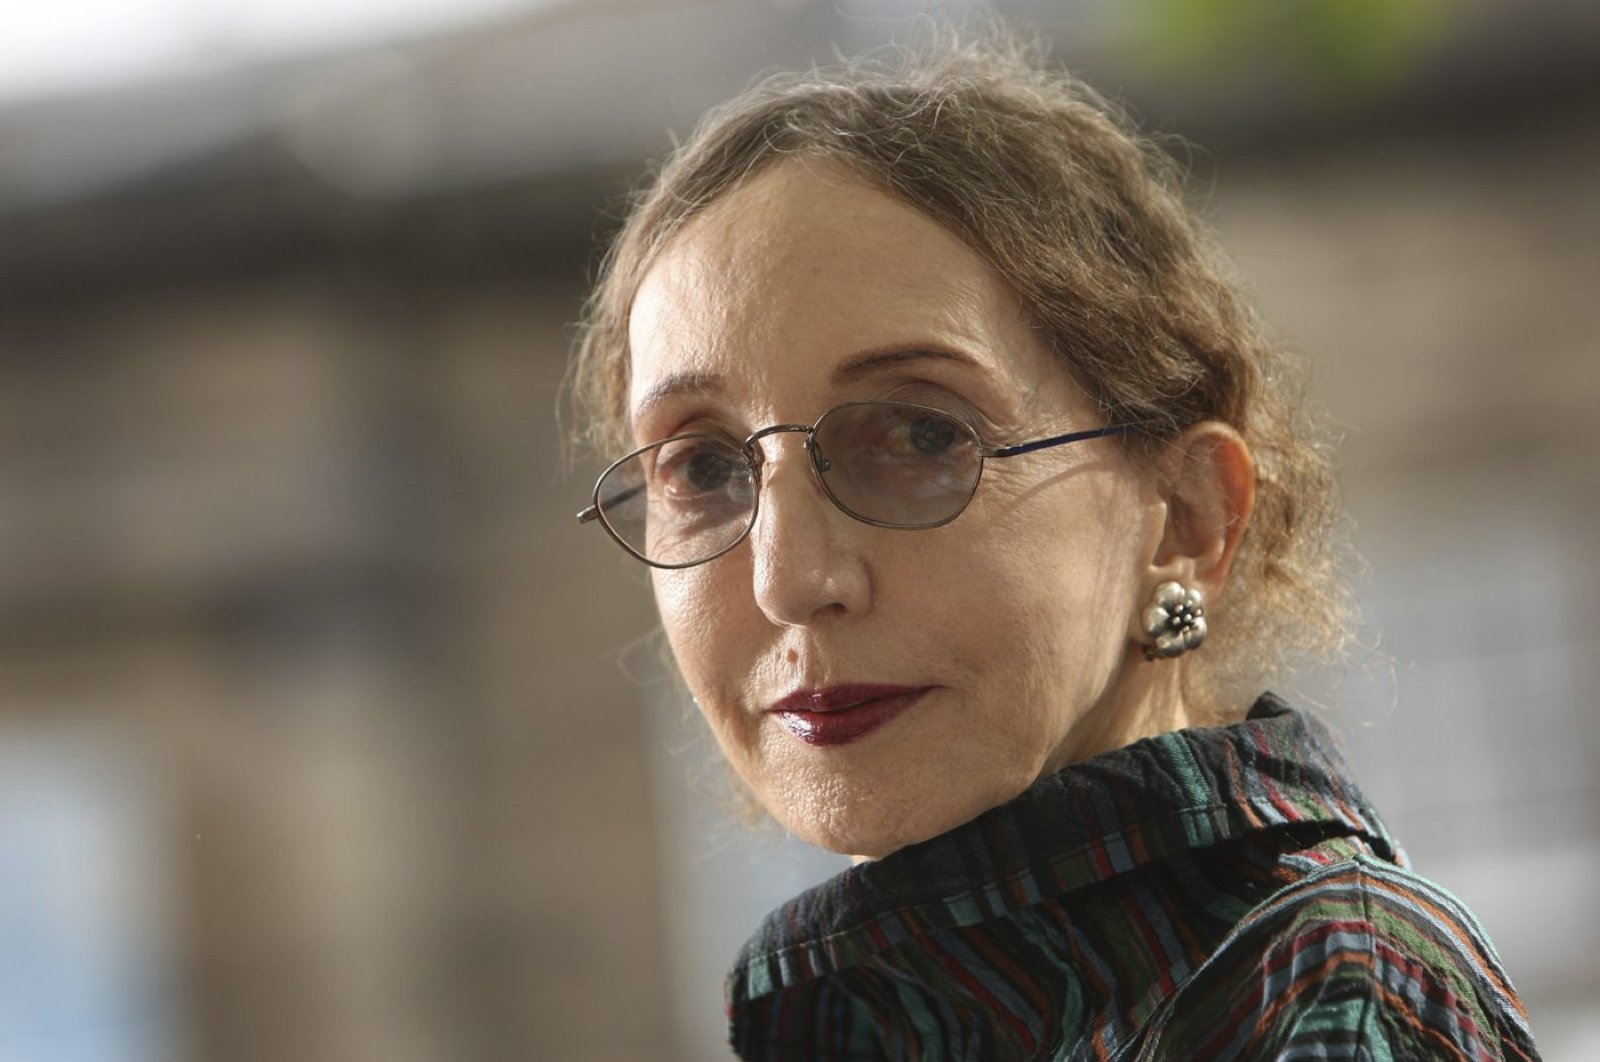 Joyce Carol Oates, an acclaimed U.S. novelist, appears at a photocall prior to participating in the Edinburgh International Book Festival 2012, Edinburgh, Scotland, Aug. 20, 2012. (Photo by Getty Images)